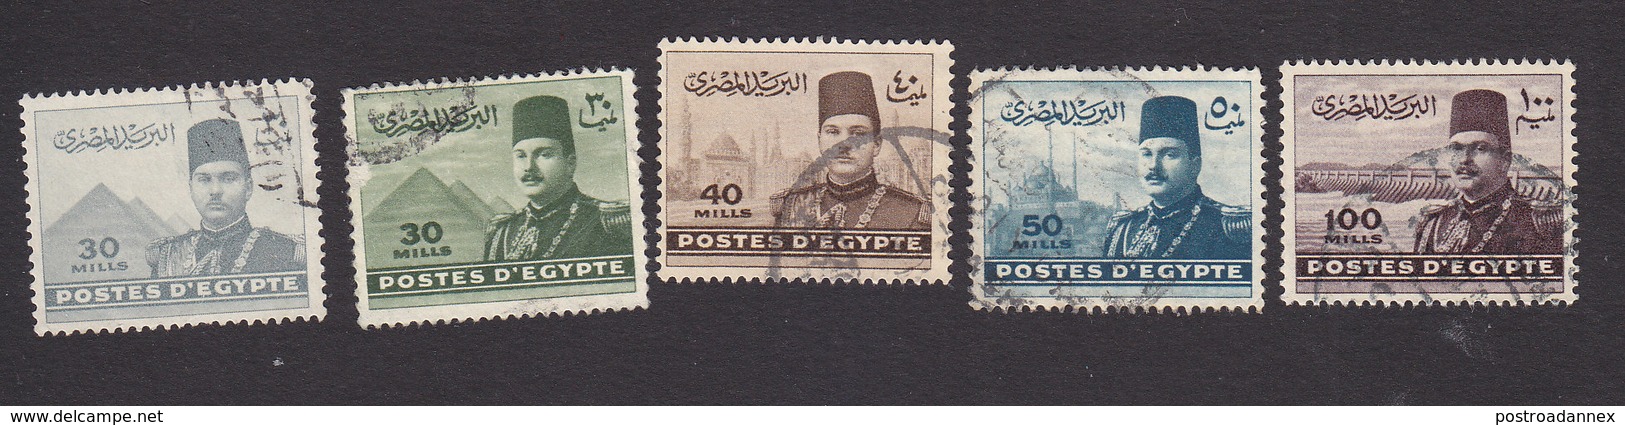 Egypt, Scott #234-237, Used, King Fuad And Scenes Of Egypt, Issued 1939 - Used Stamps